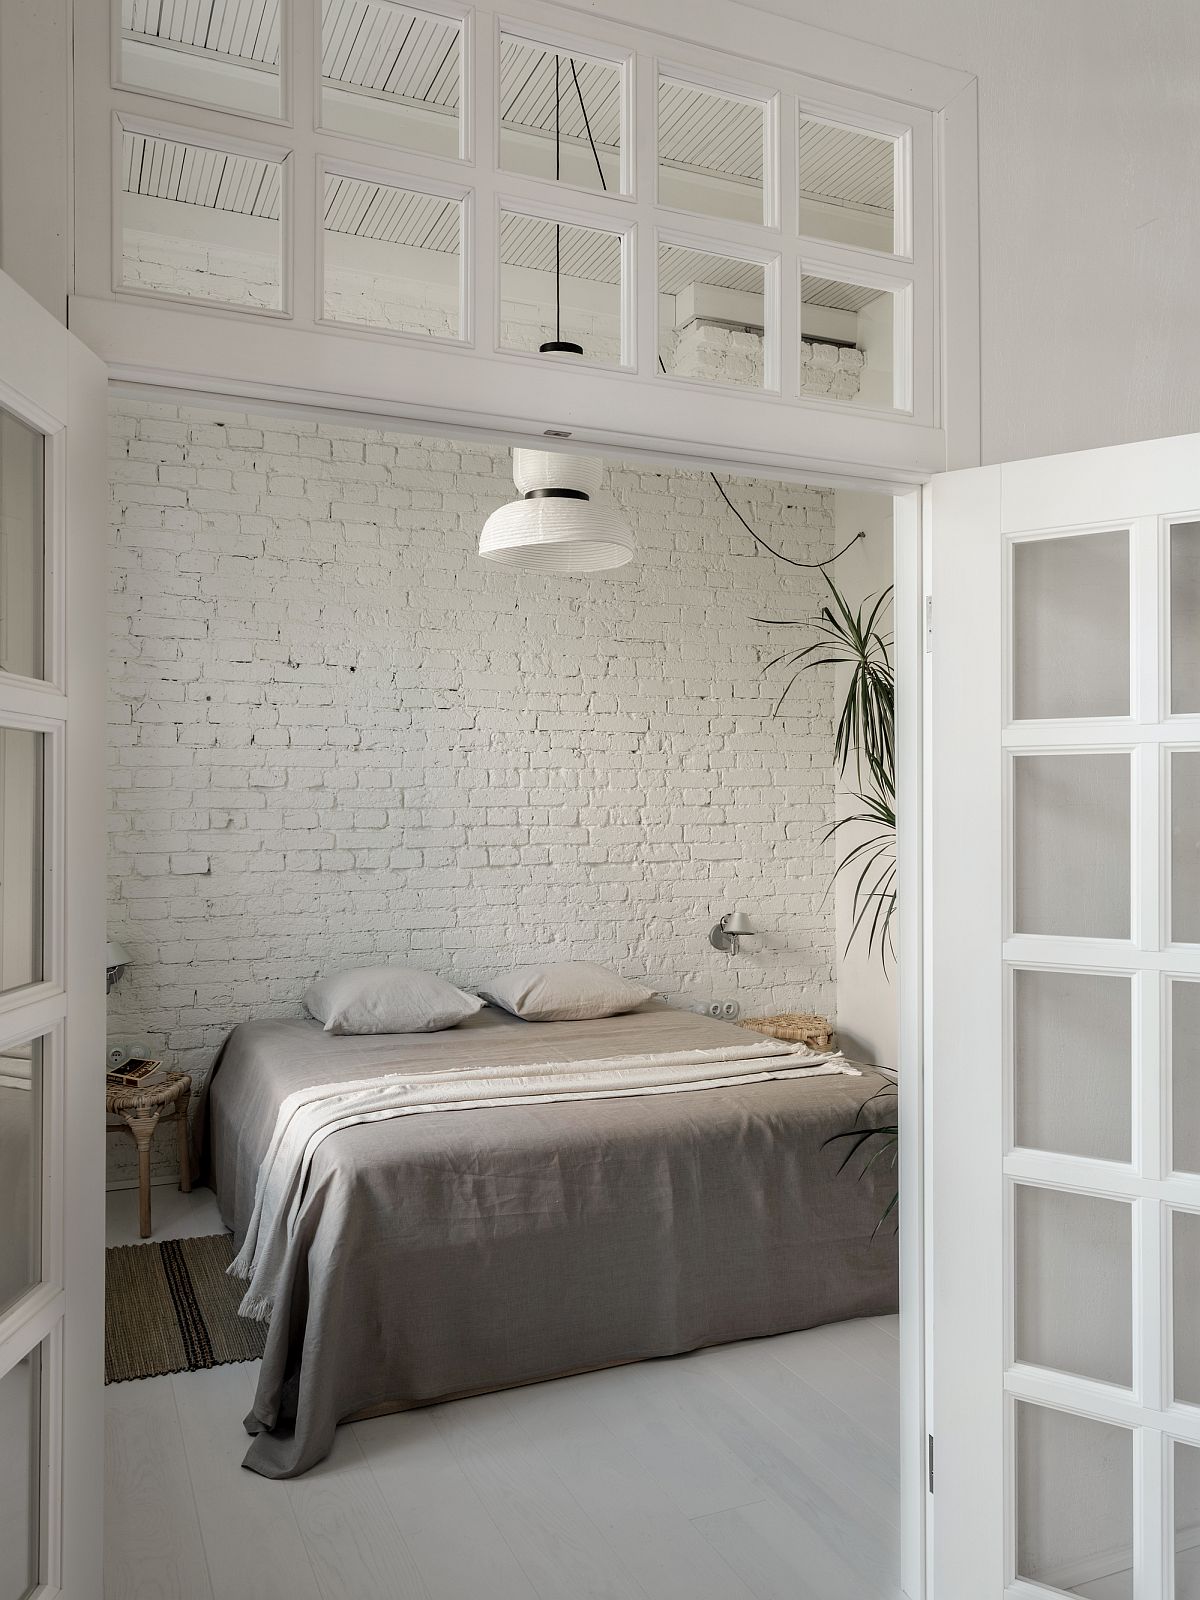 Bedroom of the Moscow apartment in white has a serene Scandinavian style about it